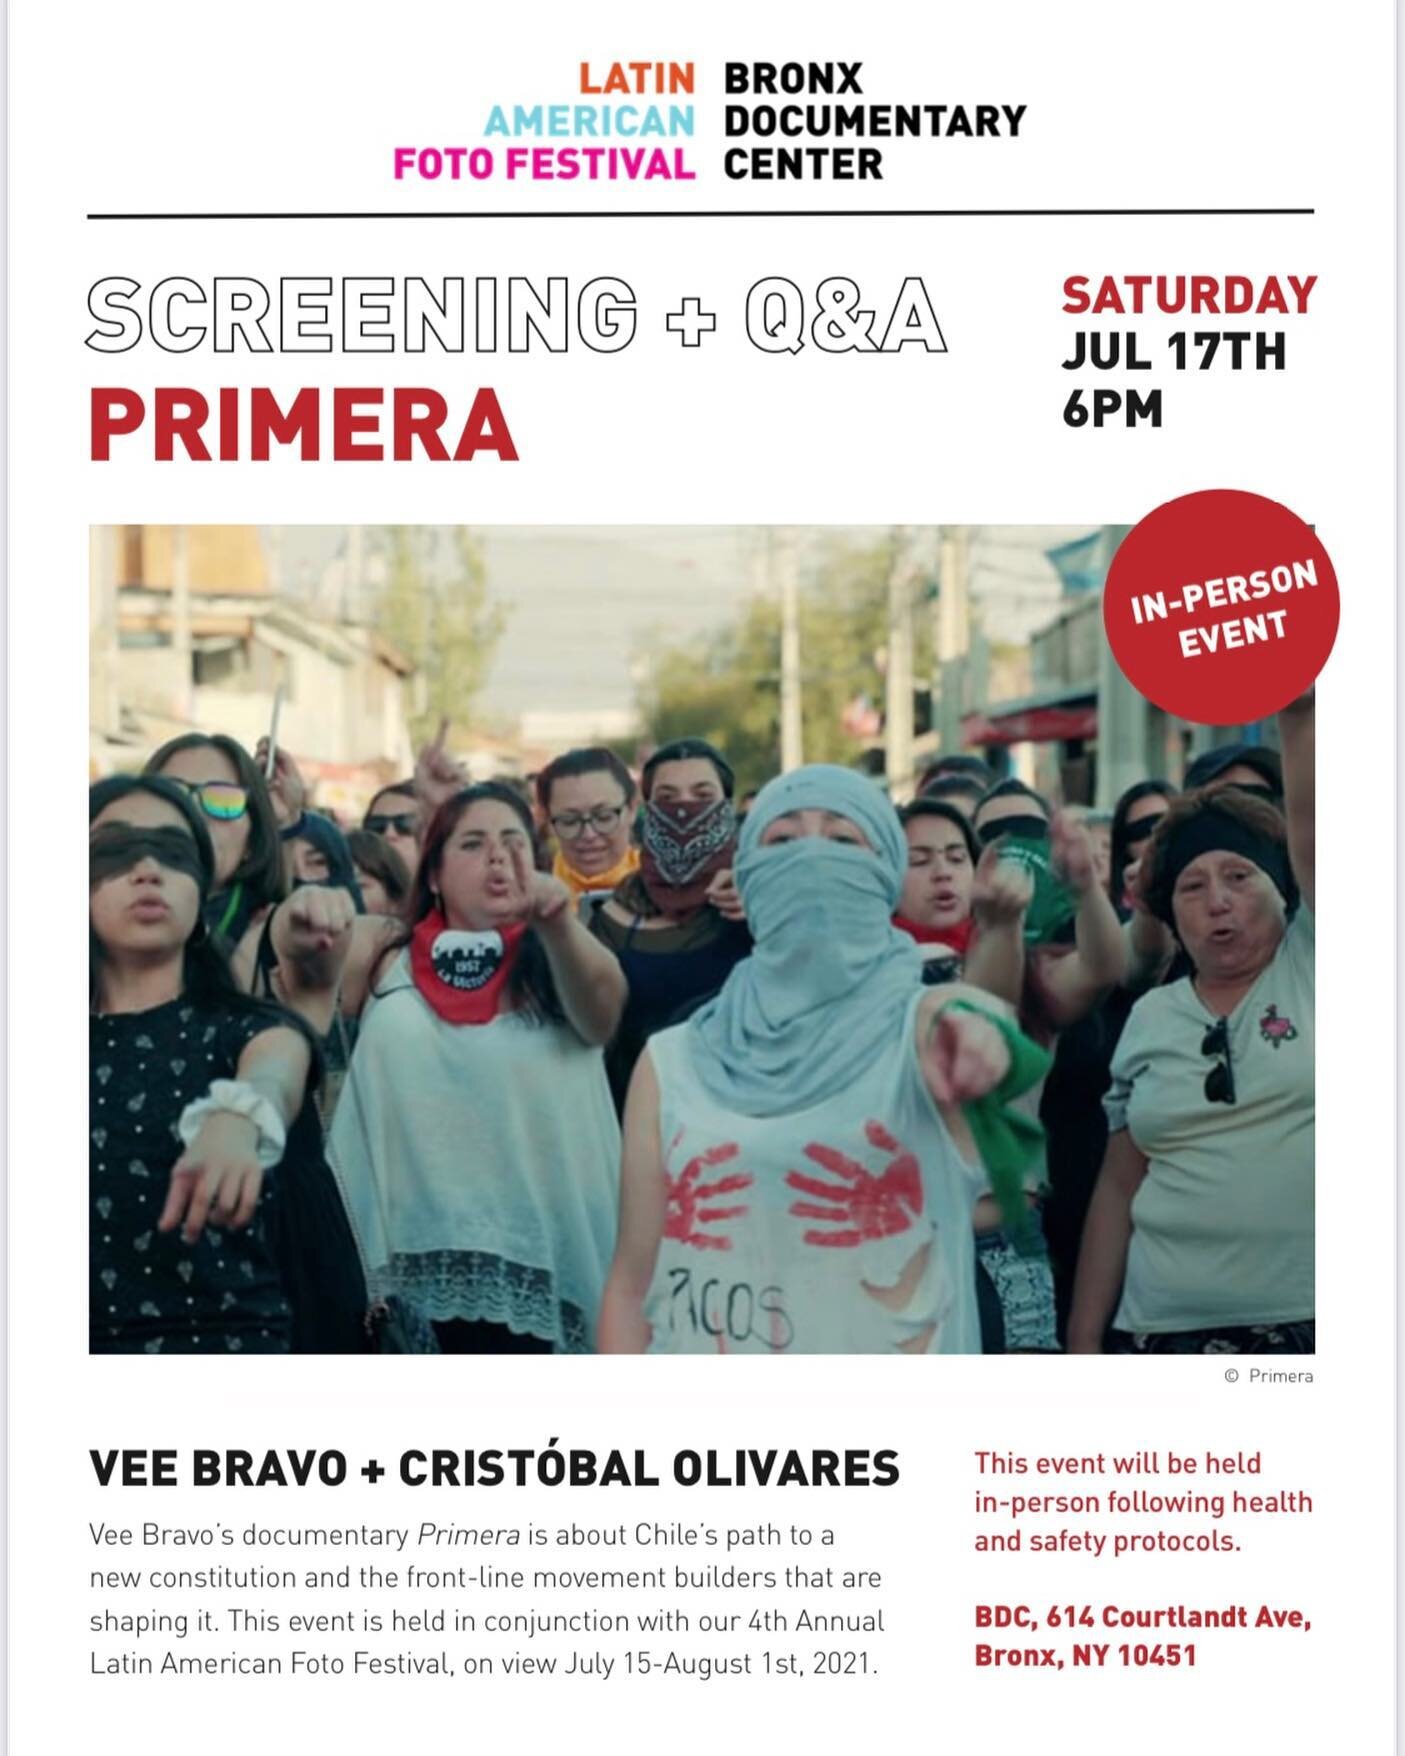 Bronx Fam: join us for a community screening of the film. We&rsquo;ll be discussing all things happening in our current political climate. Chile, Colombia, Hait&iacute;, Cuba&hellip; @klofilms @lpzmedia @aubinpictures @bronxdocumentarycenter